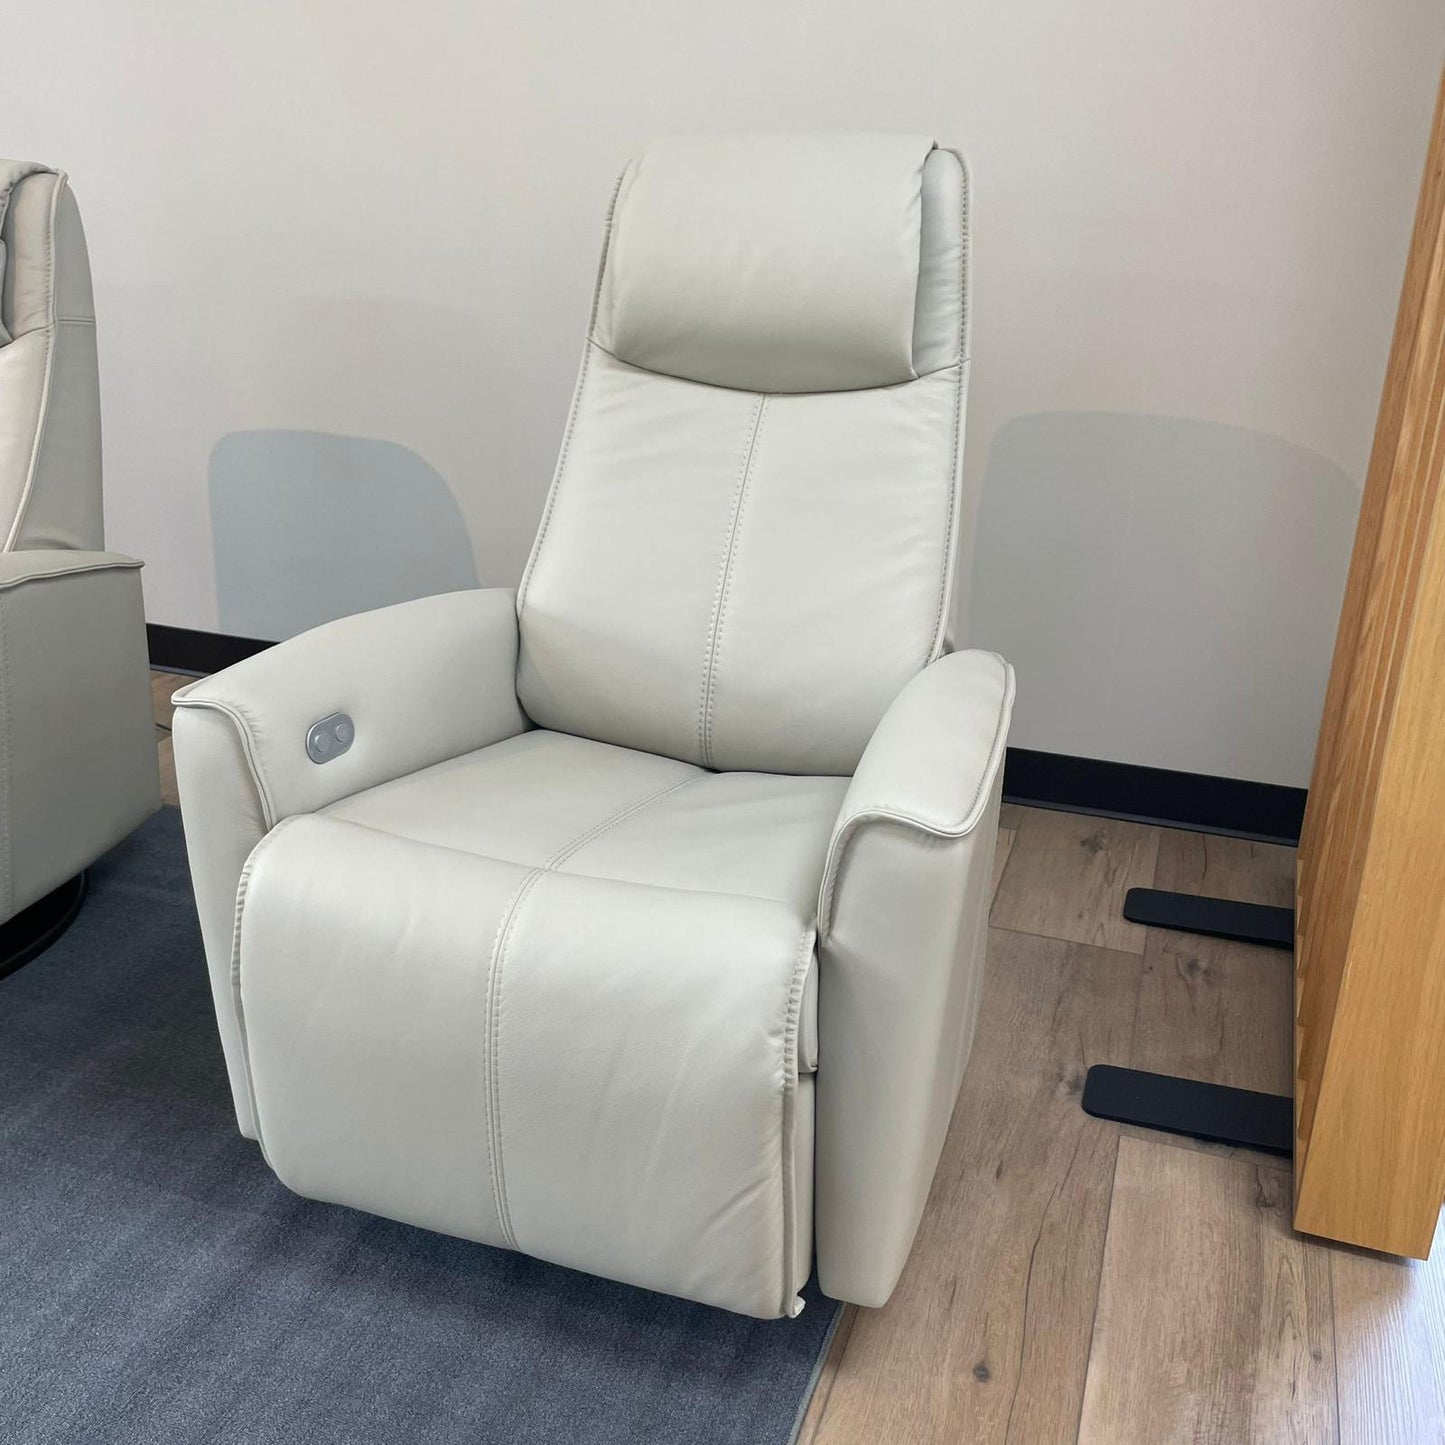 Fjords Urban - Small Size - (Power Recliner)